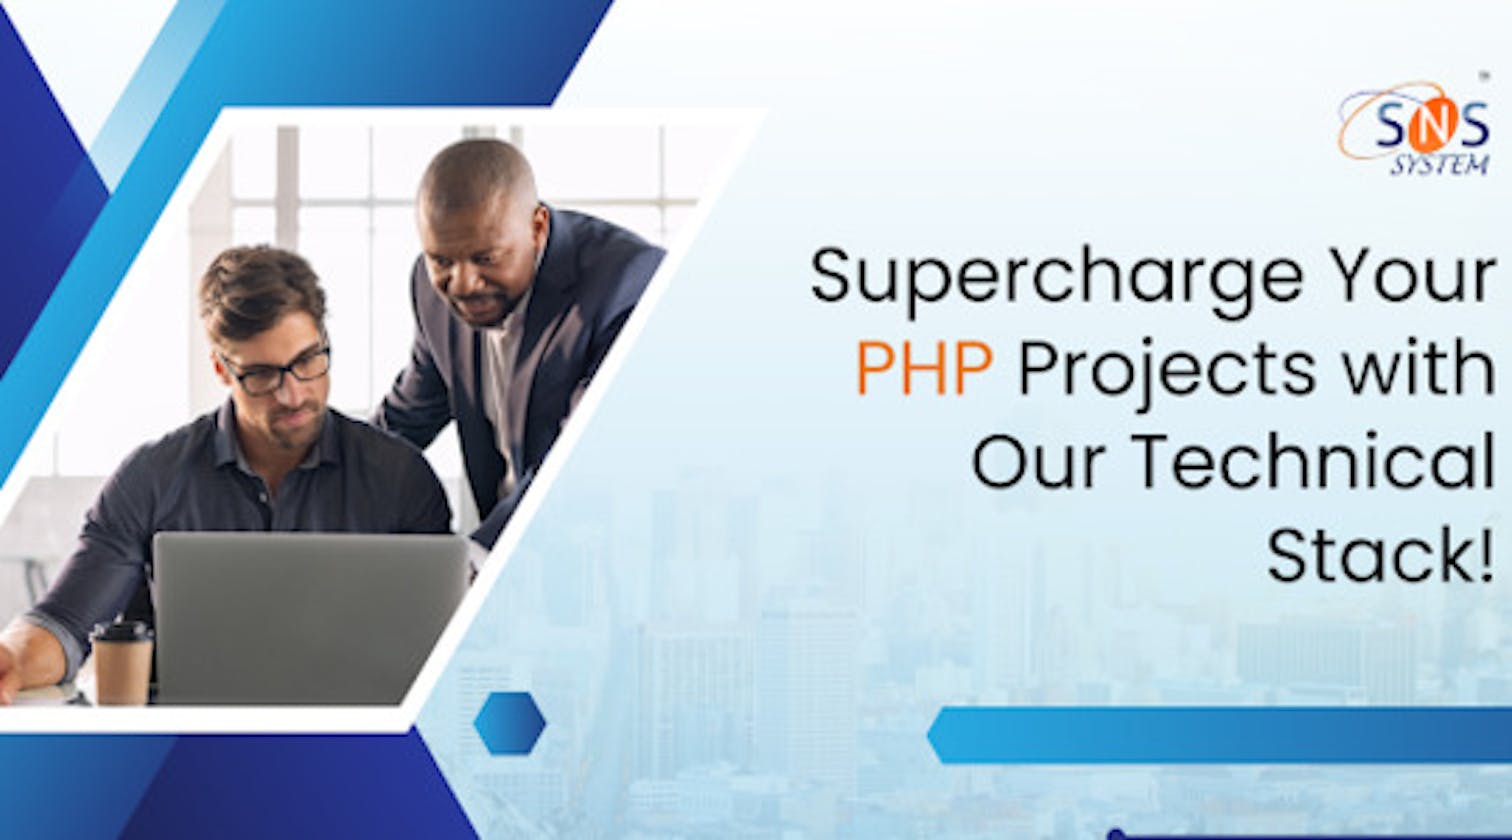 Supercharge Your PHP Projects with Our Technical Stack!